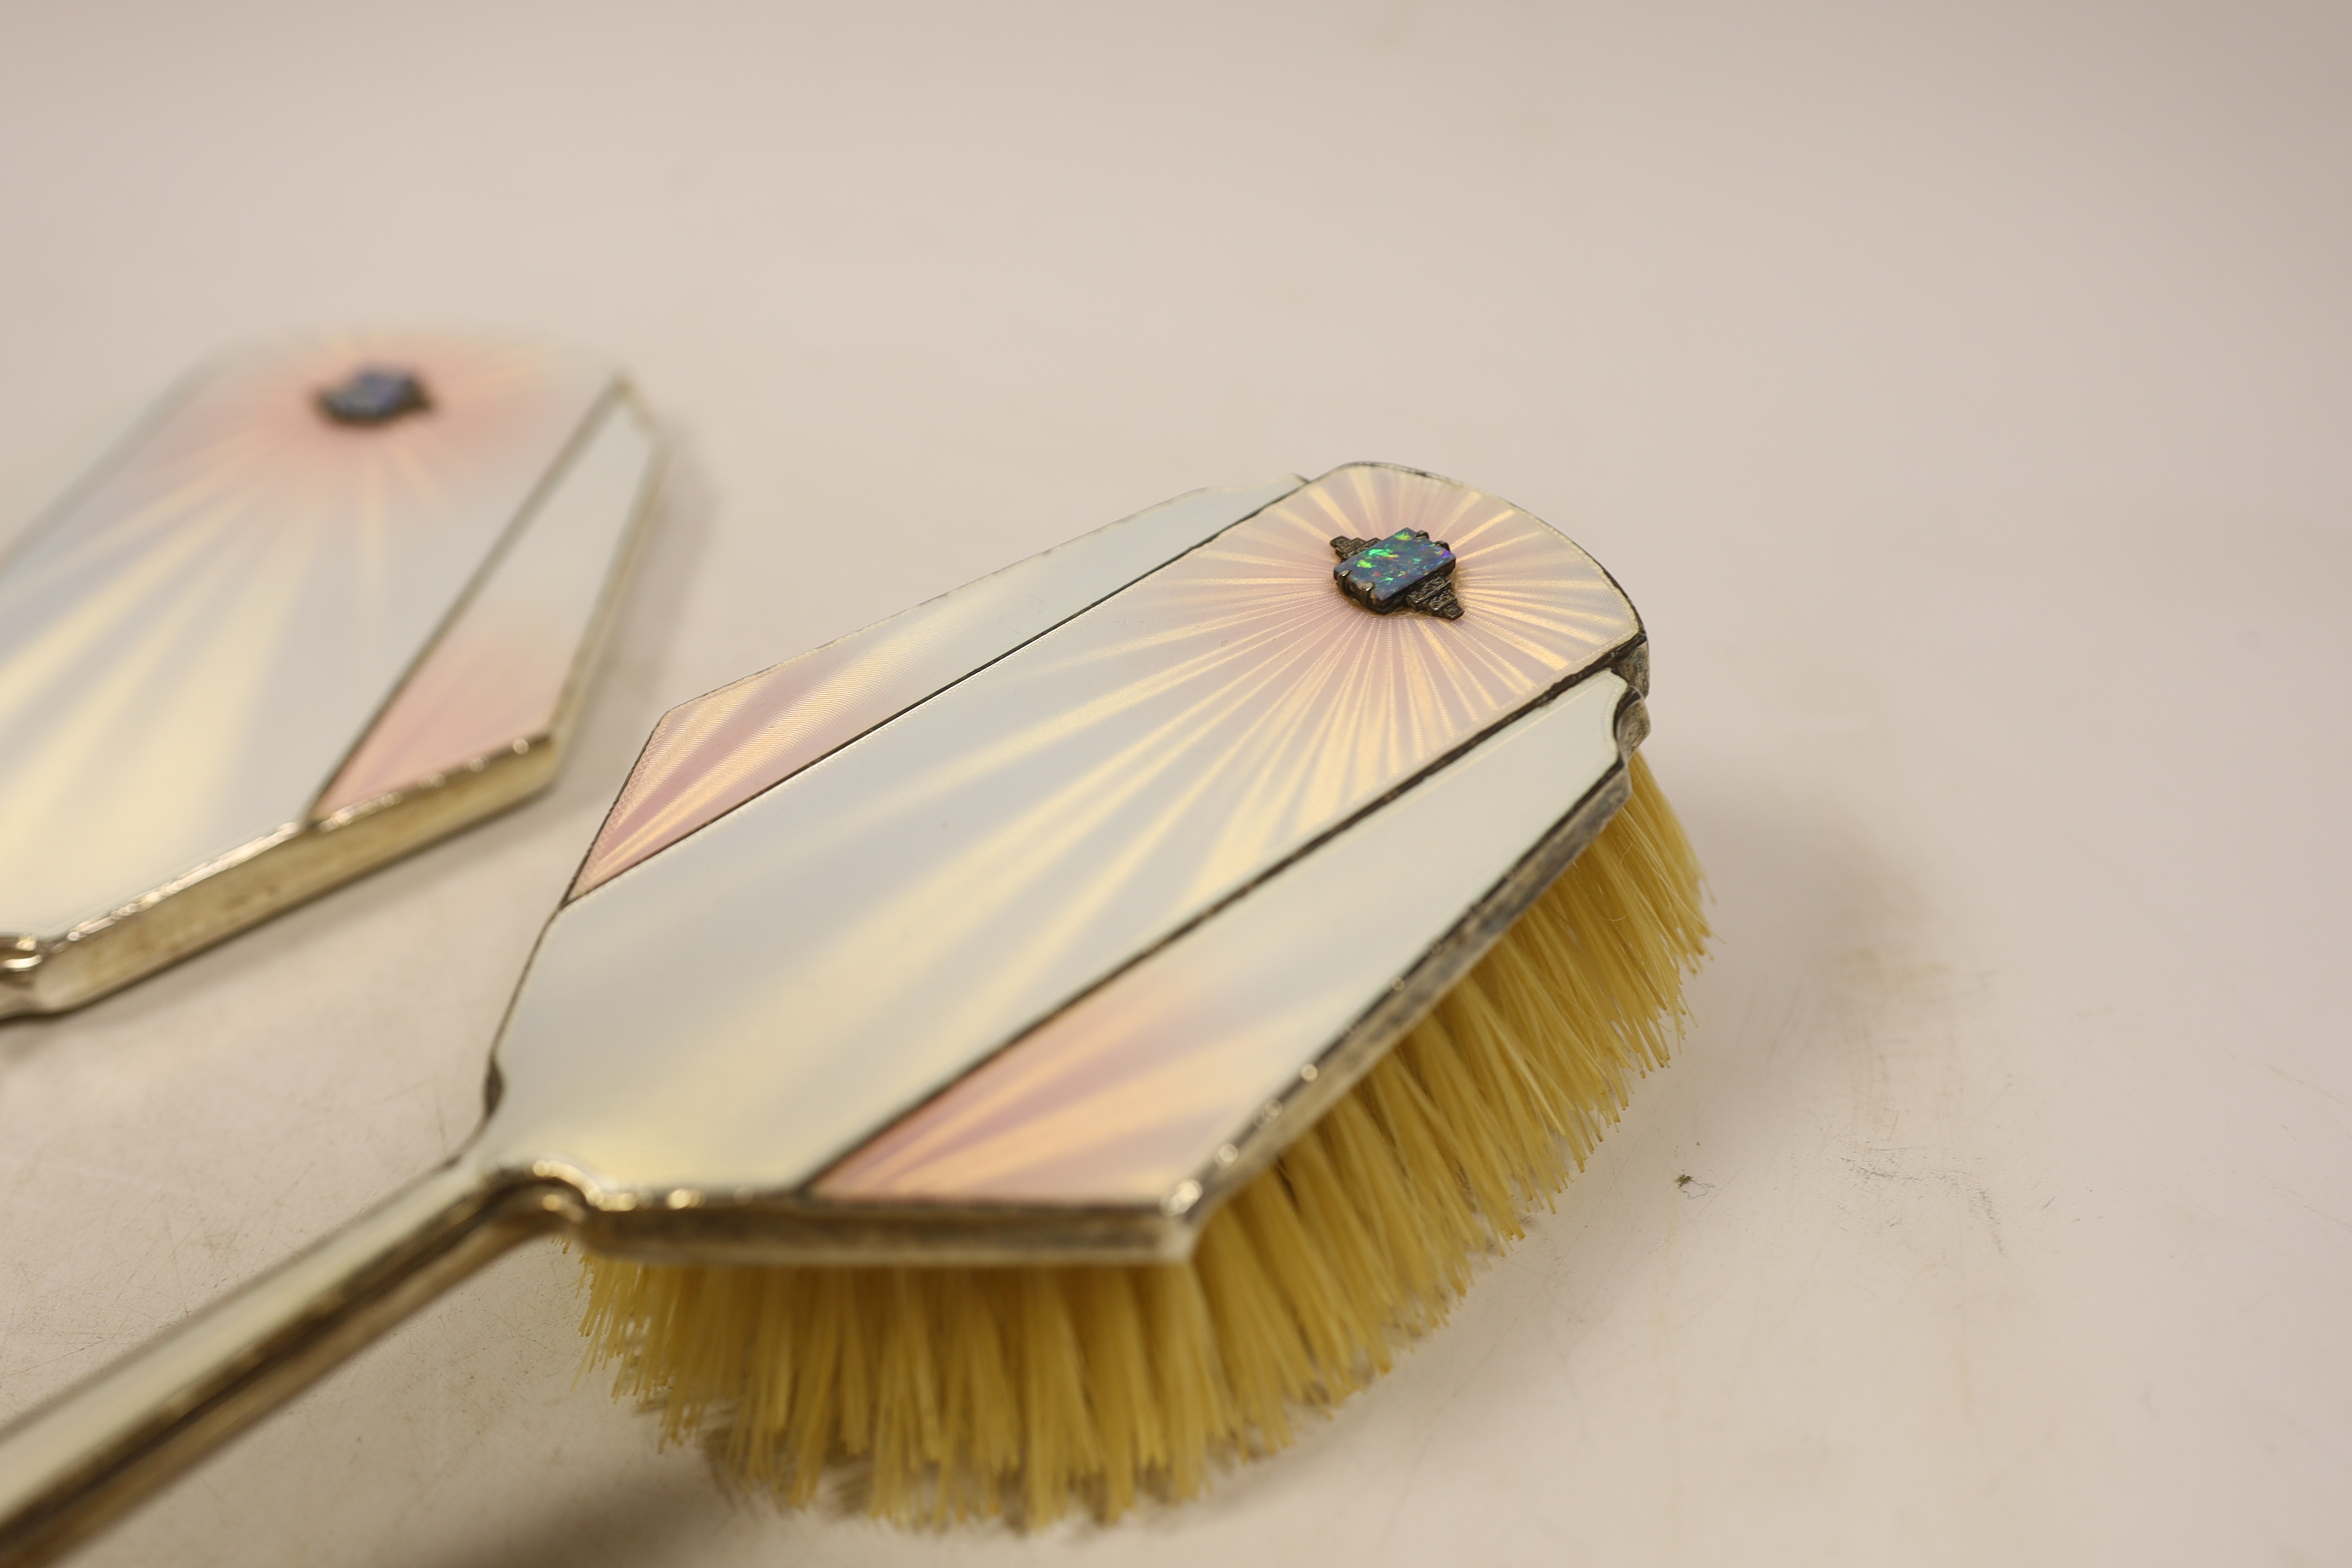 An Art Deco Mappin & Webb silver, enamel, marcasite and black opal mounted six piece mirror, comb (lacking teeth) and brush set, Birmingham, 1935